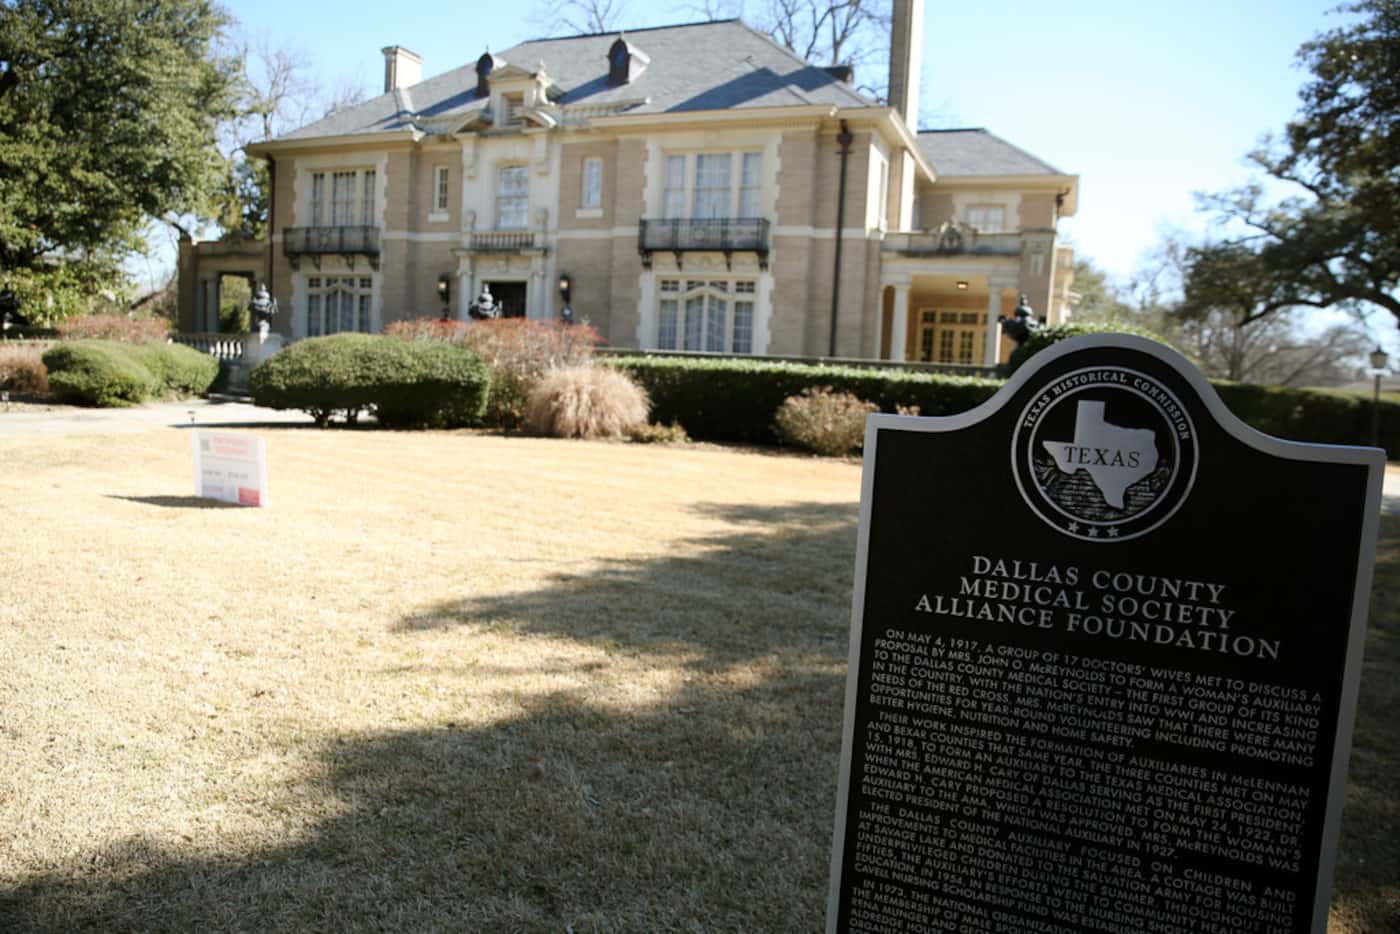 The Aldredge House, which was gifted to the Dallas County Medical Society Alliance in 1973...